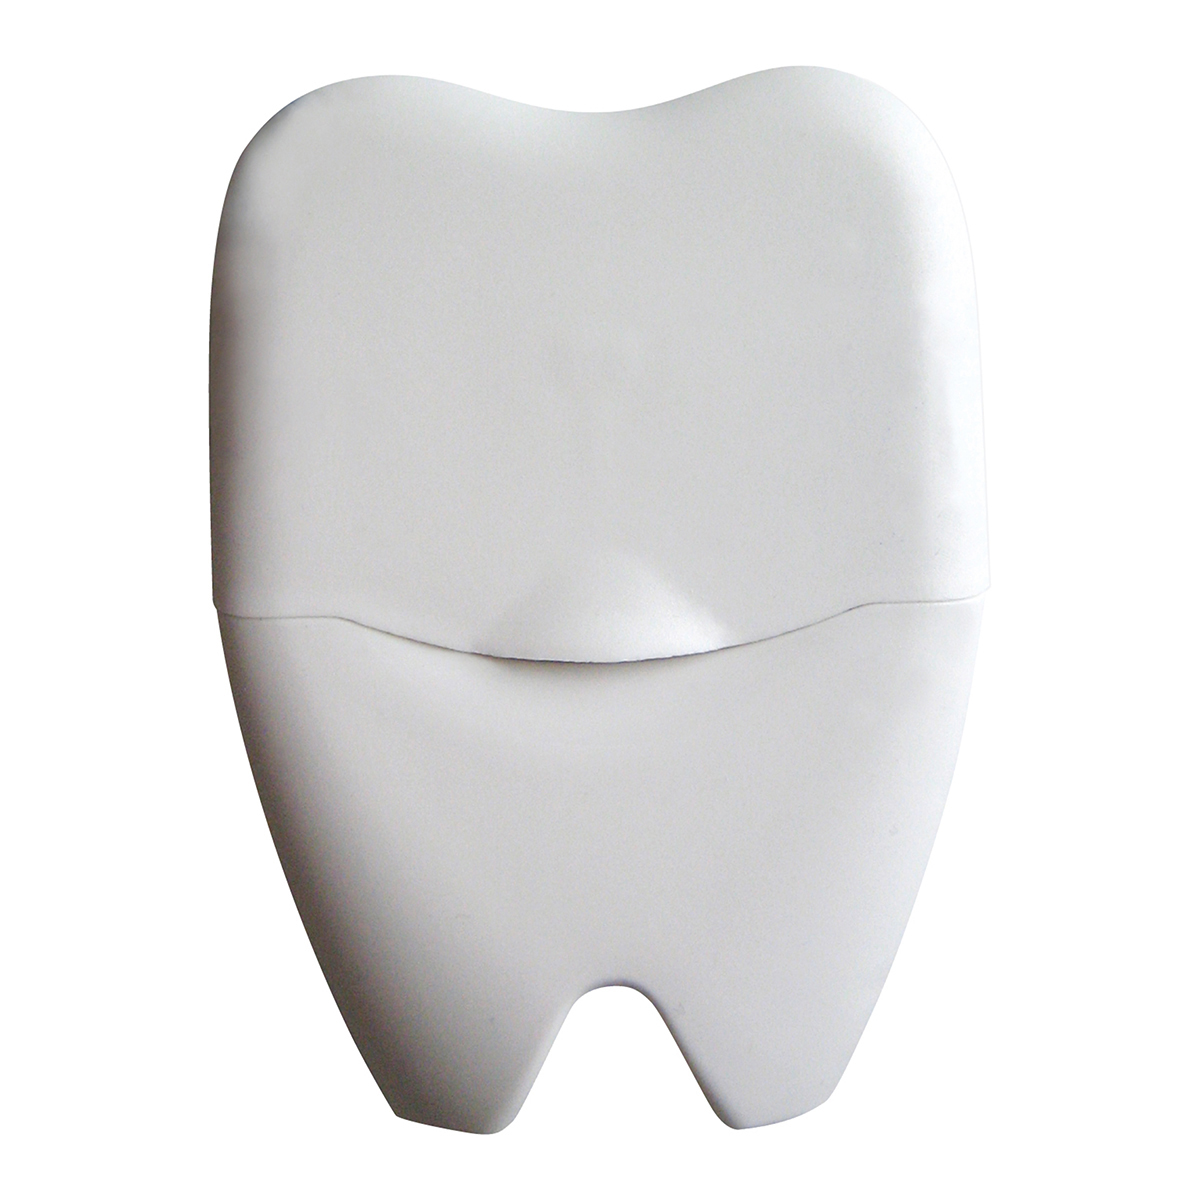 Decal Large Tooth Shaped Dental Floss